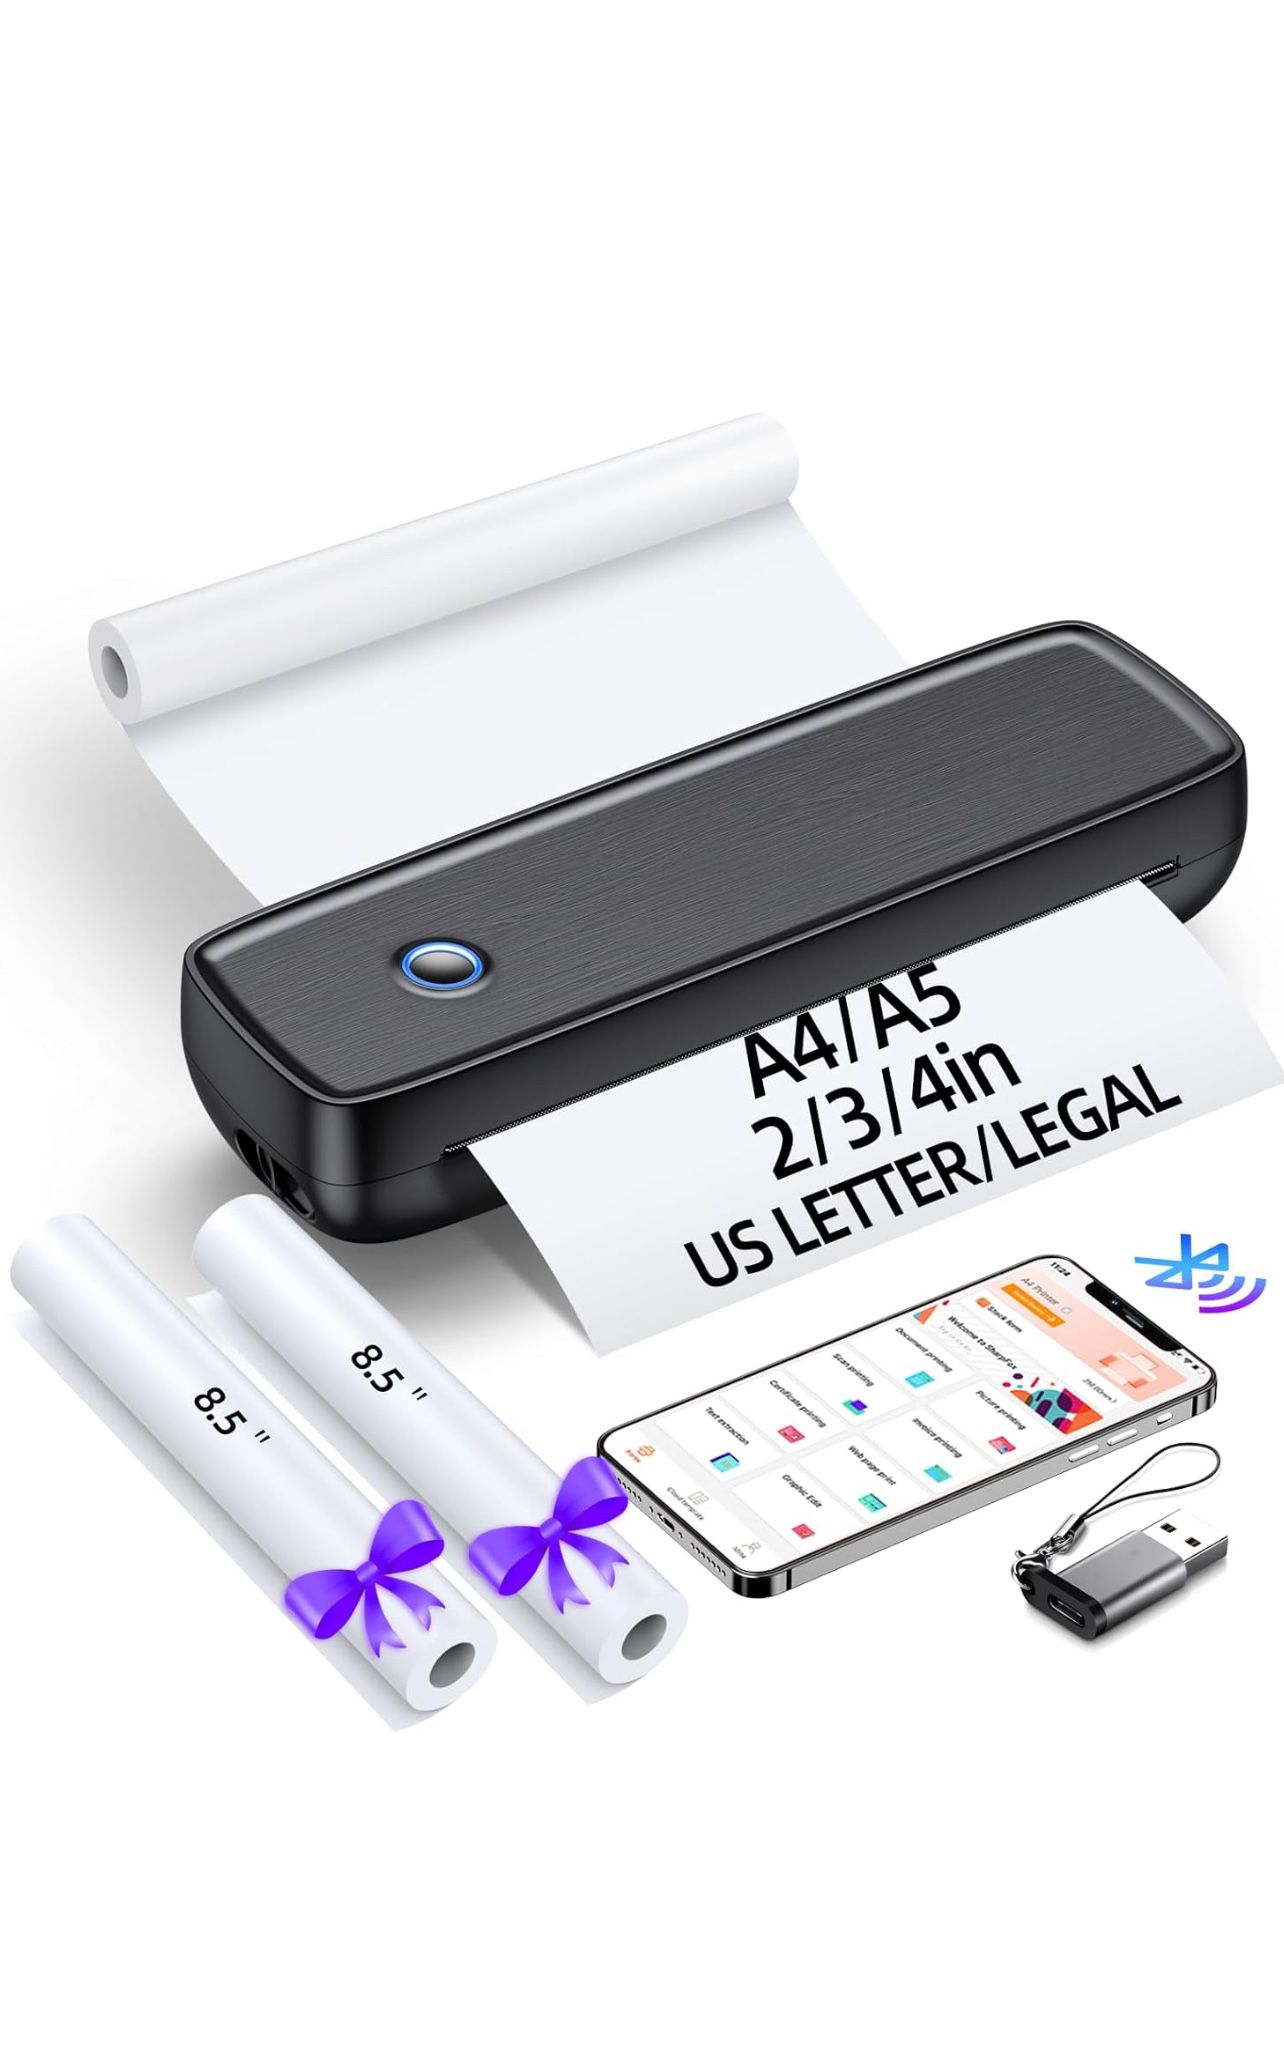 Portable Printer Wireless for Travel，Bluetooth Thermal Printer Support 8.5" X 11" US Letter &Legal, A4&A5 Thermal Paper, Inkless Printer Compatible wi